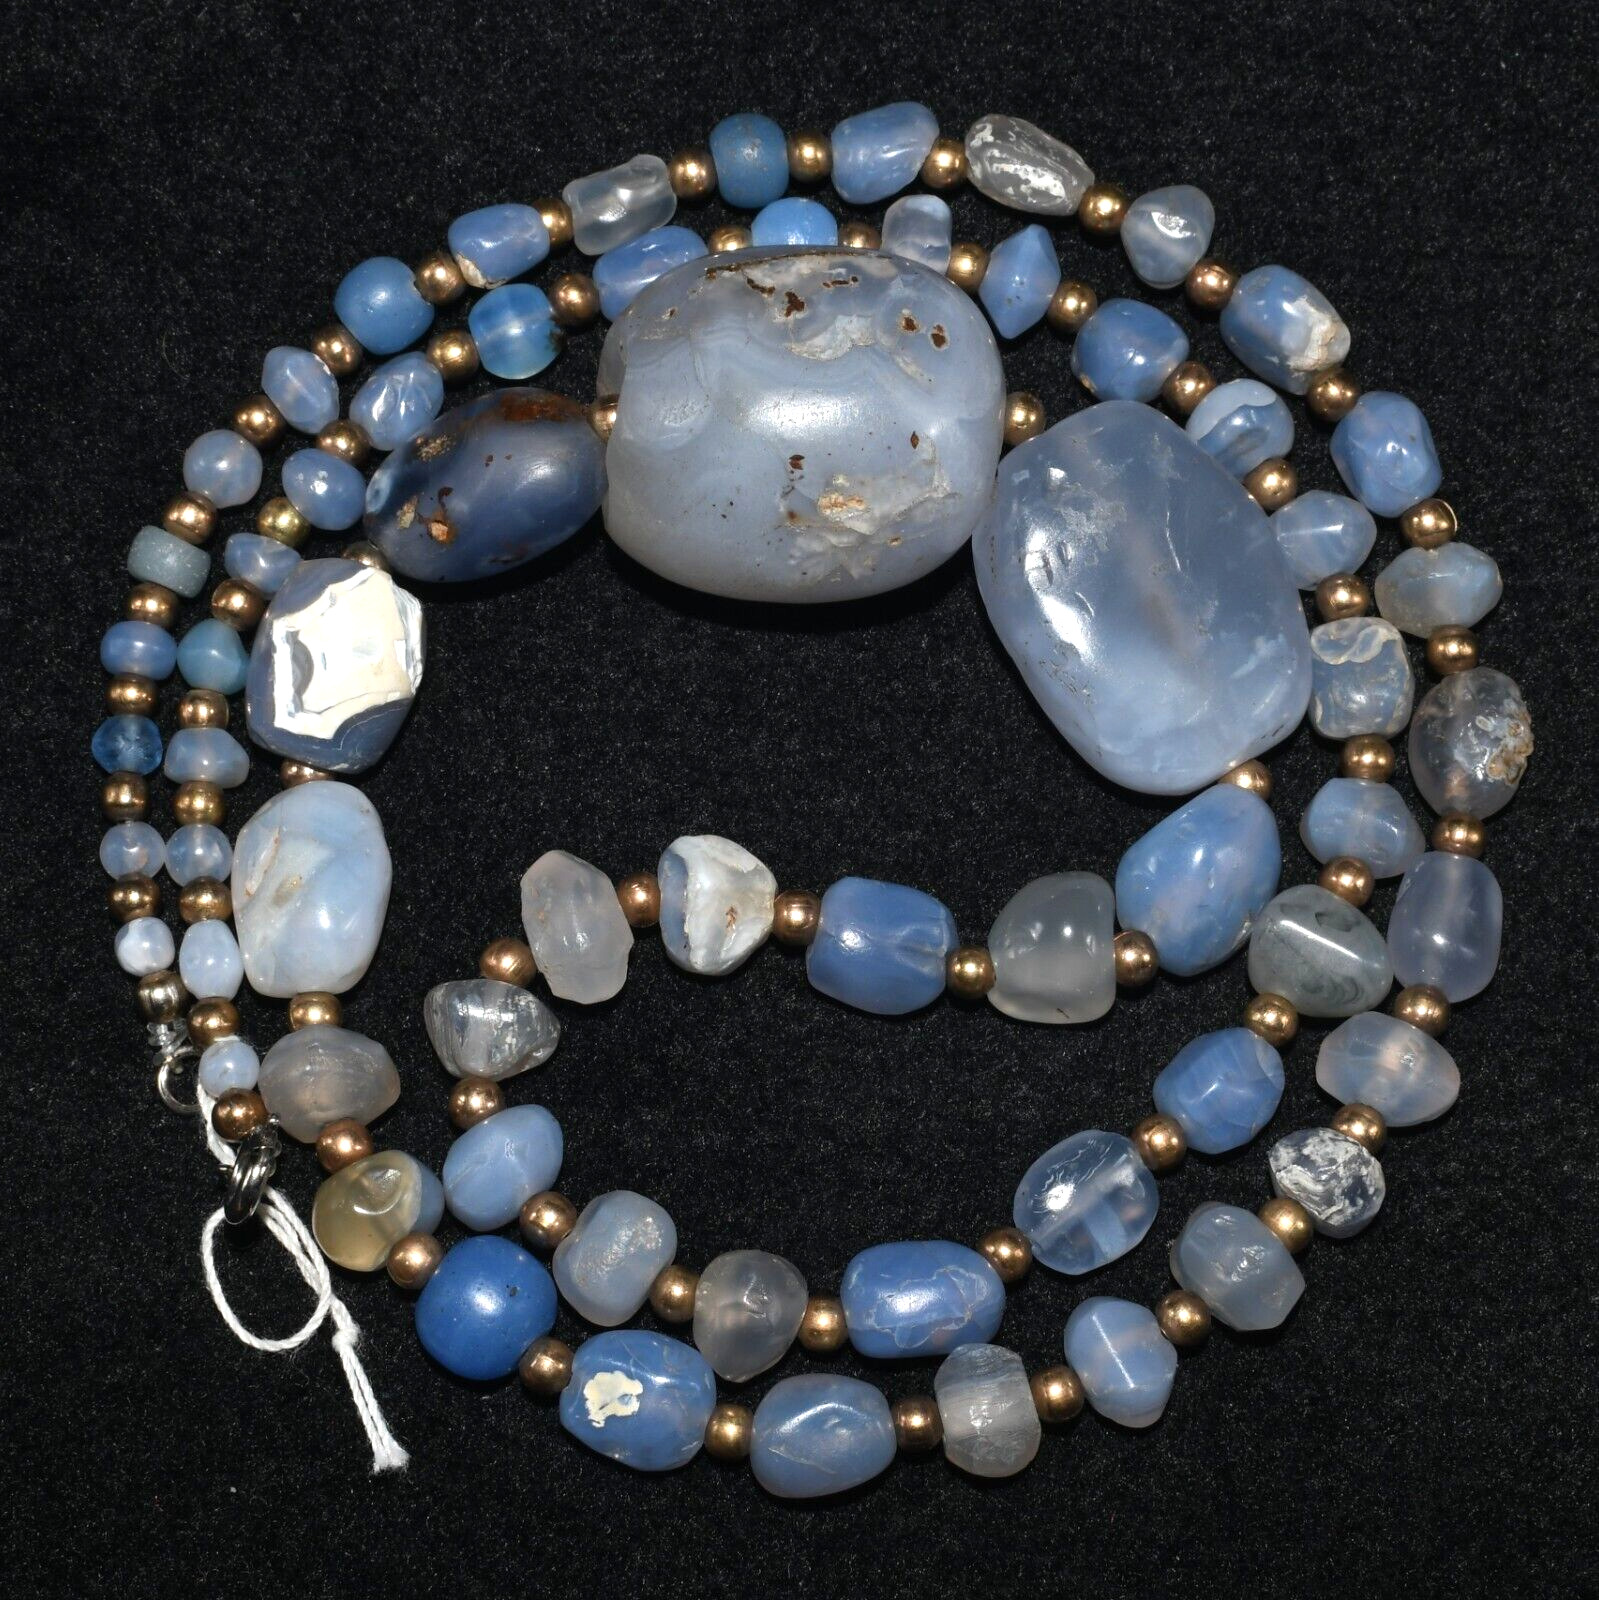 Large Genuine Ancient Bactrian Roman Blue Agate Calcedony Stone Bead Necklace